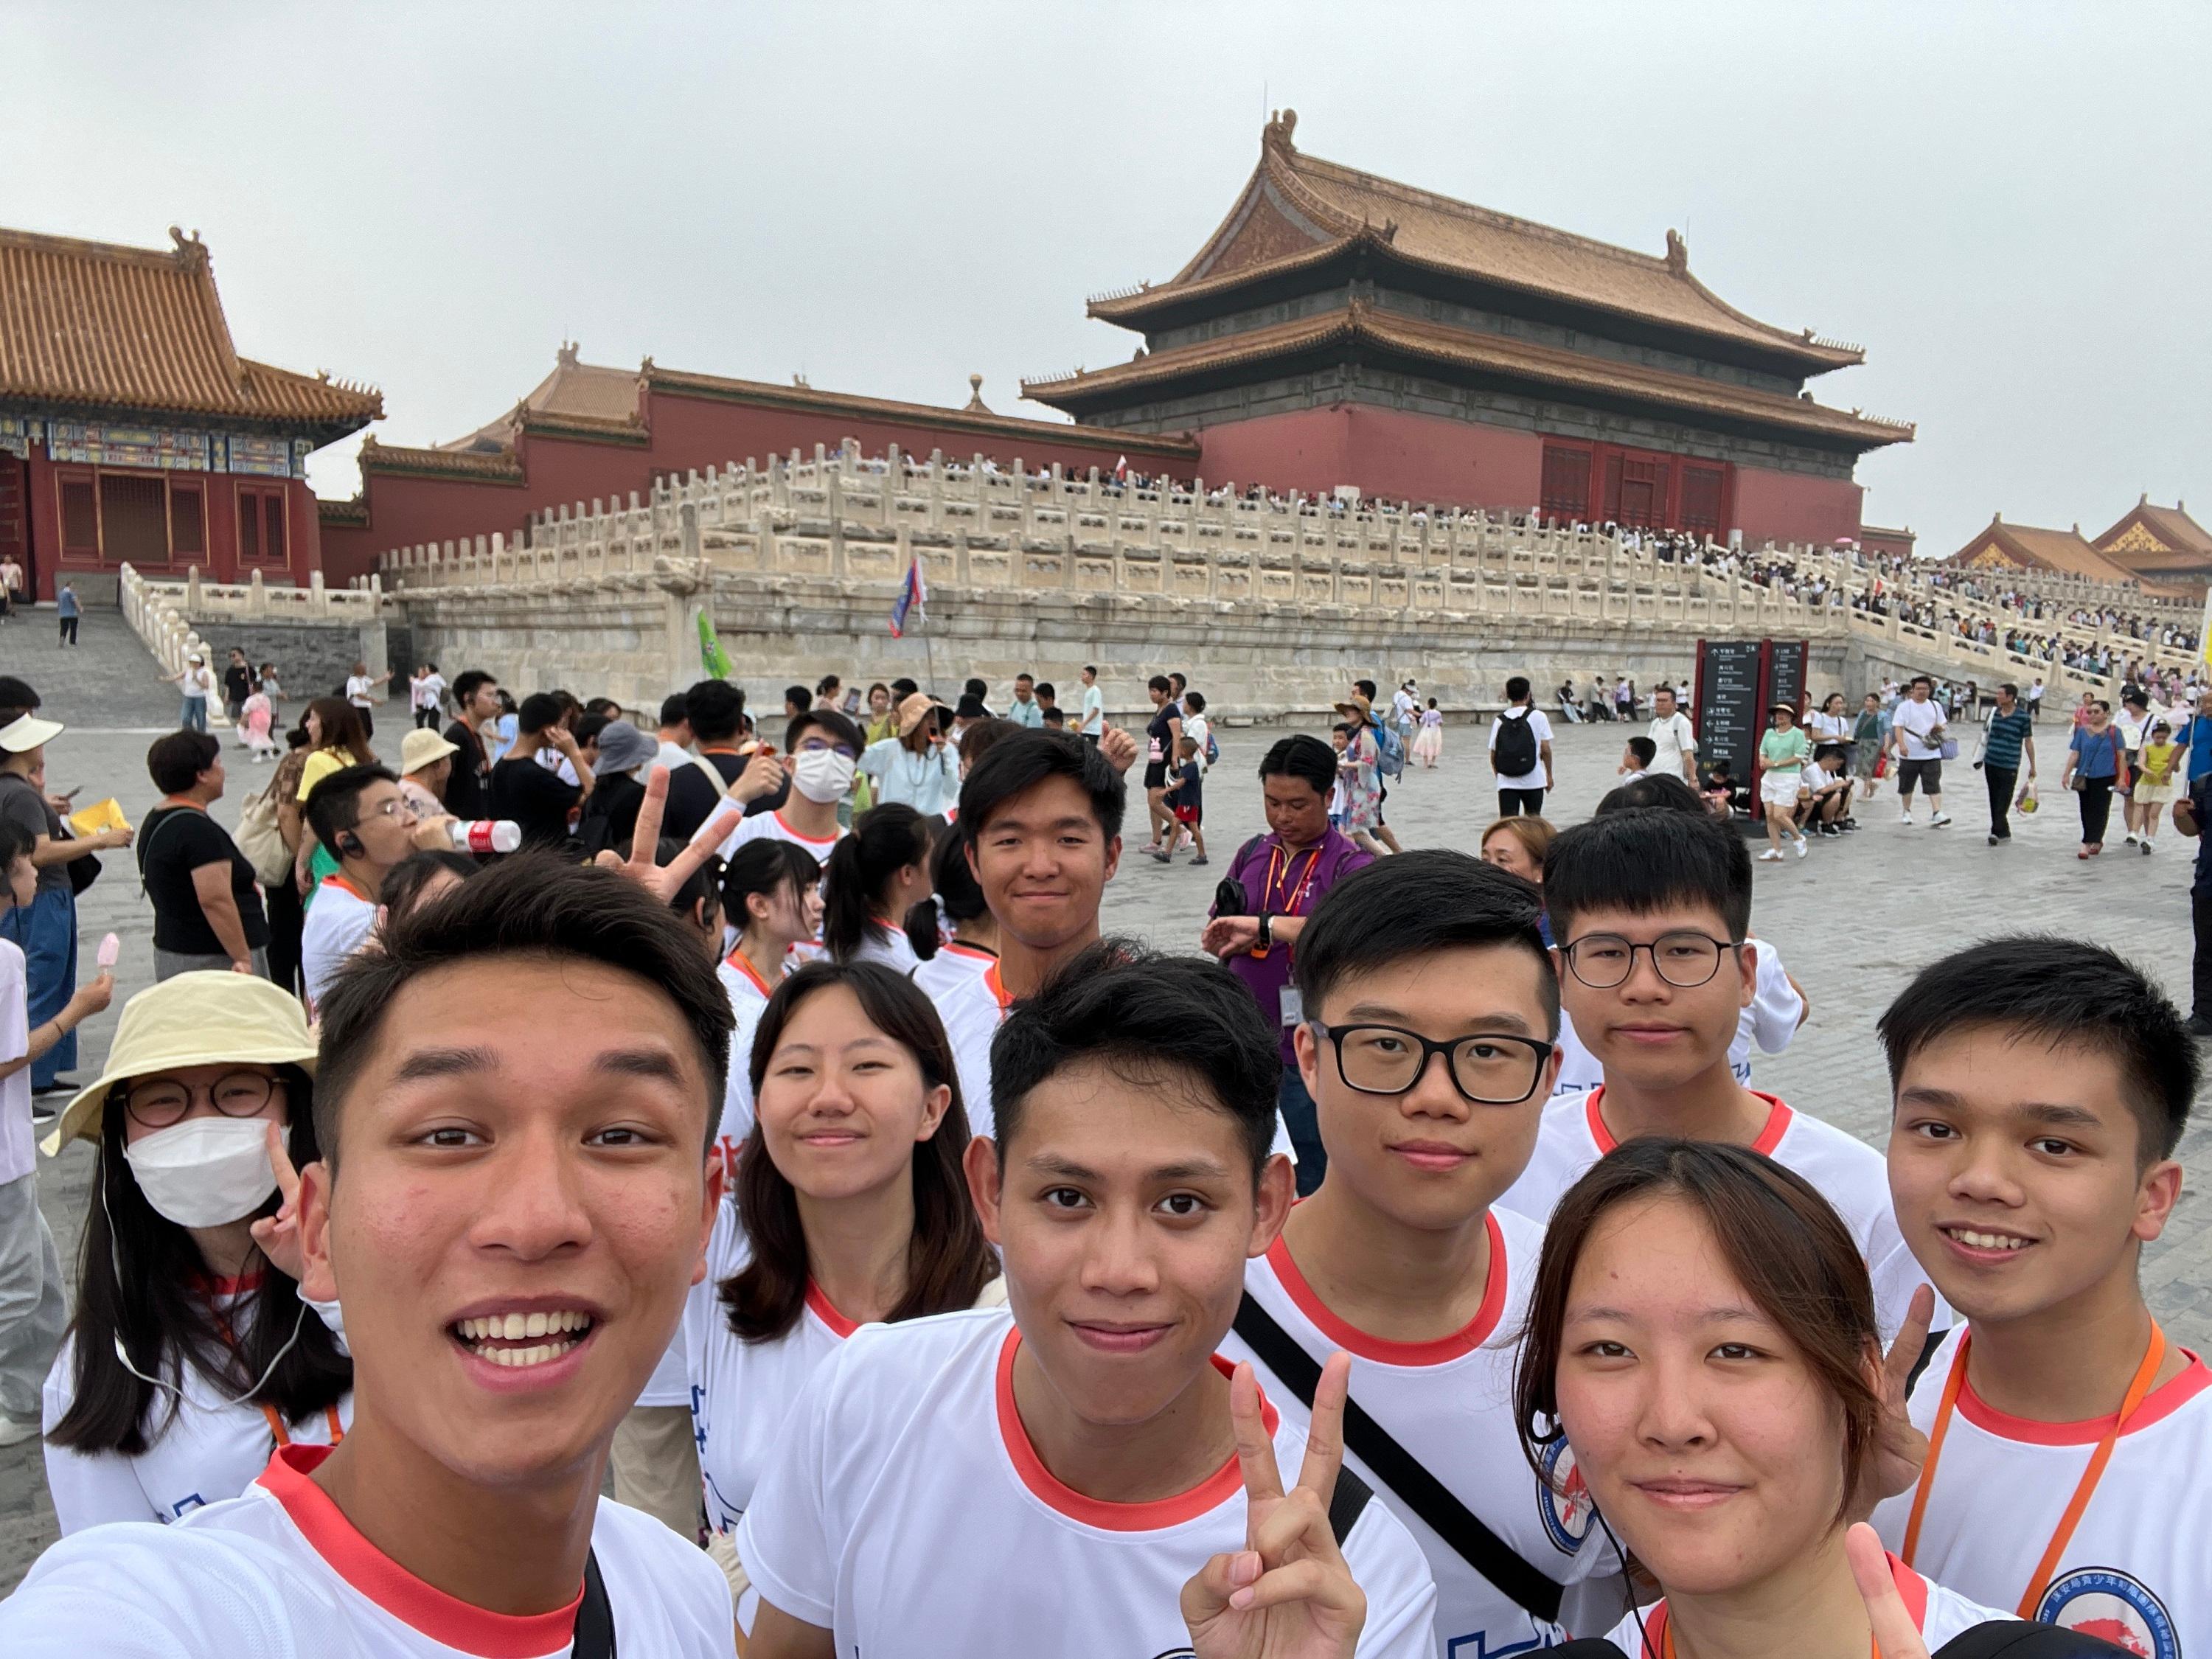 Secretary for Security, Mr Tang Ping-keung, led members of the Security Bureau Youth Uniformed Group Leaders Forum to continue visit to Beijing. Photo shows youth group members visiting the Palace Museum to appreciate precious artefacts and the unique architecture on August 20.